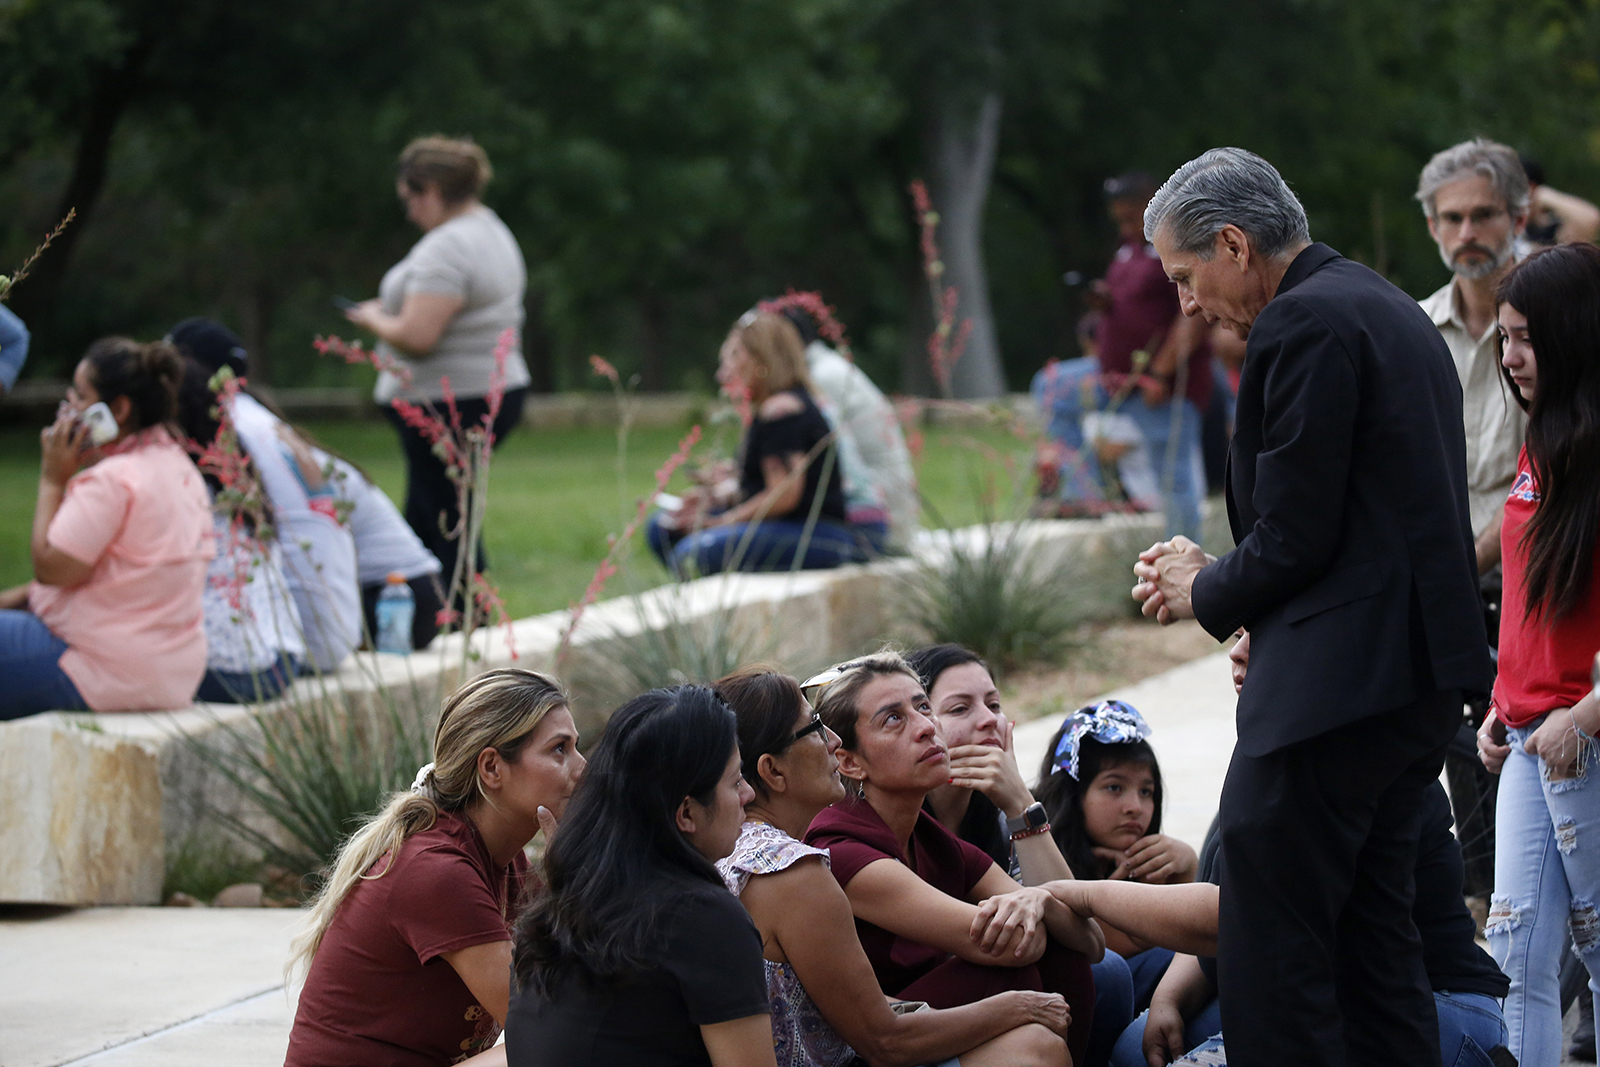 The archbishop of San Antonio, Gustavo Garcia-Siller, right, comforts families outside the Civic Center following a deadly school shooting at Robb Elementary School in Uvalde, Texas, Tuesday, May 24, 2022. (AP Photo/Dario Lopez-Mills)